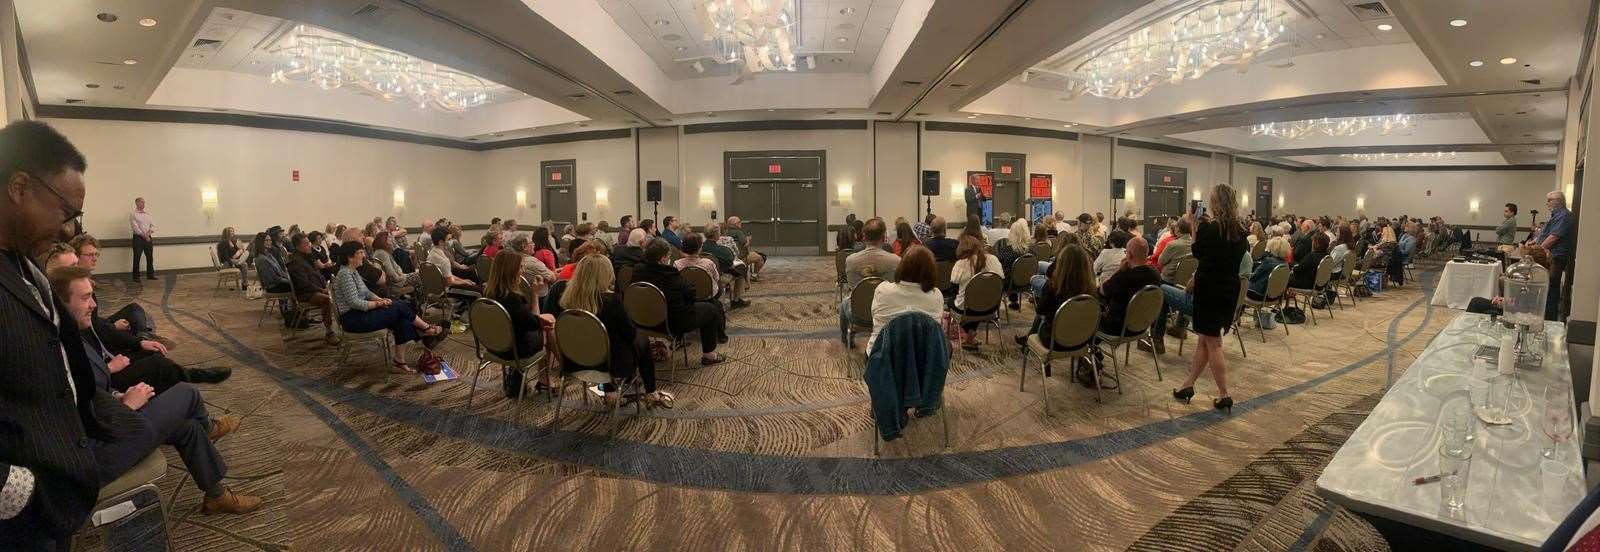 The audience at Nigel Farage's US speaking tour appearance in Pittsburgh. Picture: FreedomWorks